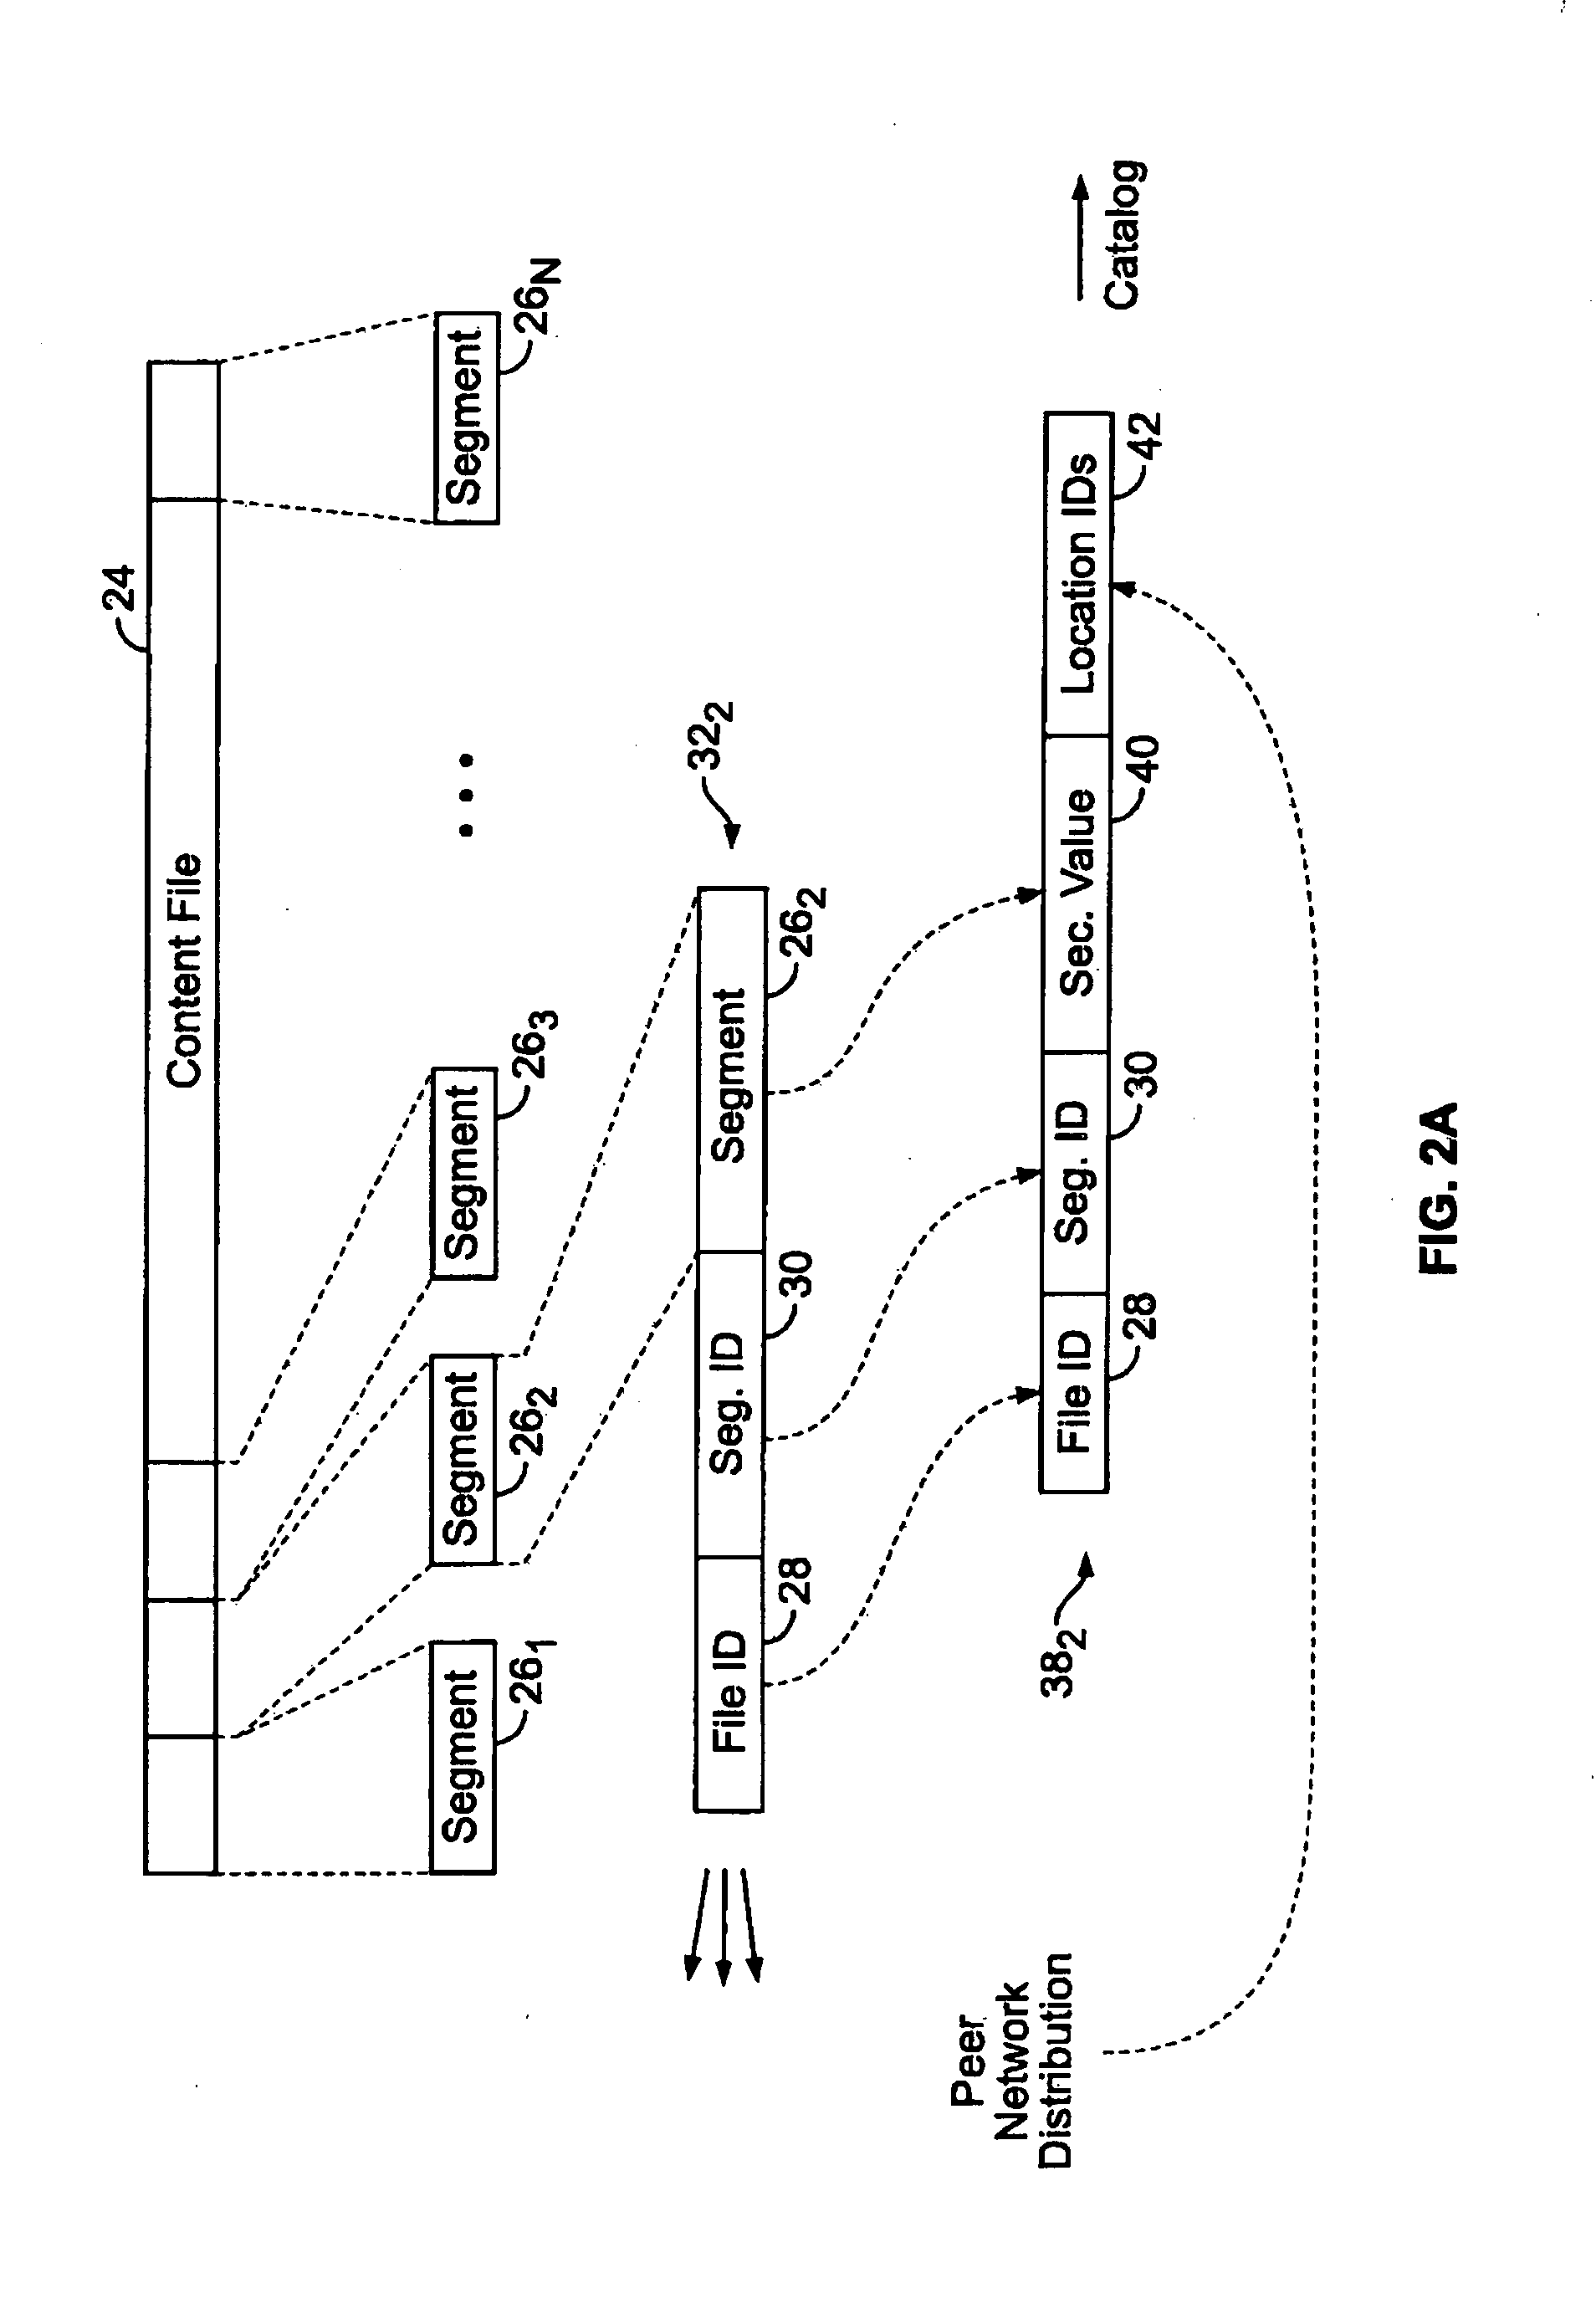 System and methods of streamlining media files from a dispersed peer network to maintain quality of service